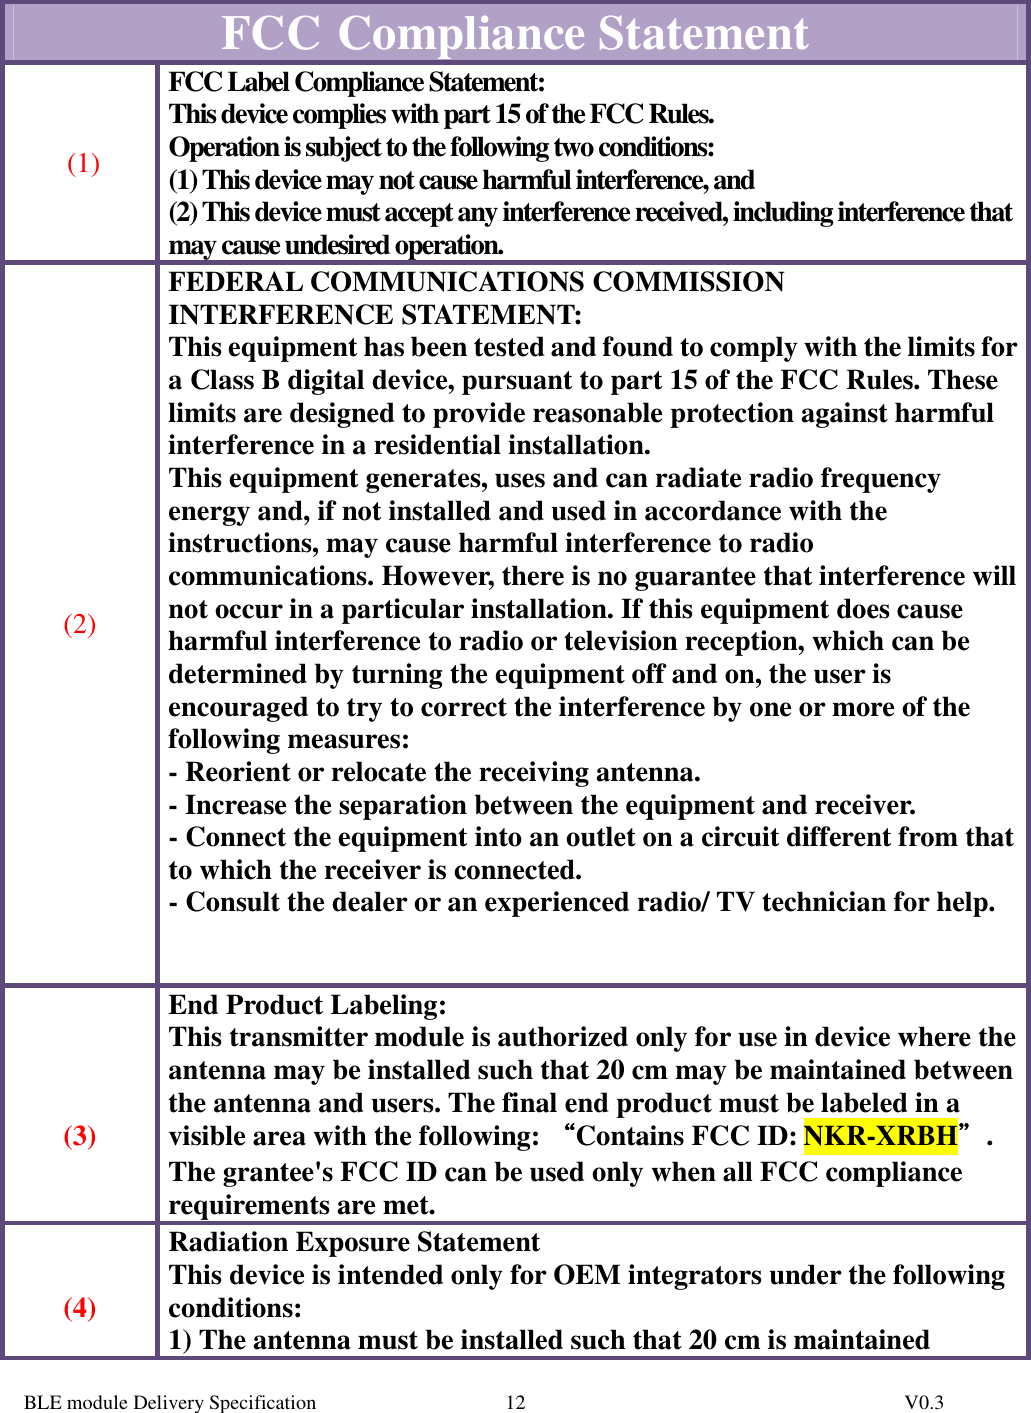  BLE module Delivery Specification          V0.3 12FCC   Compliance Statement  (1) FCC Label Compliance Statement: This device complies with part 15 of the FCC Rules.  Operation is subject to the following two conditions:  (1) This device may not cause harmful interference, and  (2) This device must accept any interference received, including interference that may cause undesired operation.   (2) FEDERAL COMMUNICATIONS COMMISSION INTERFERENCE STATEMENT: This equipment has been tested and found to comply with the limits for a Class B digital device, pursuant to part 15 of the FCC Rules. These limits are designed to provide reasonable protection against harmful interference in a residential installation. This equipment generates, uses and can radiate radio frequency energy and, if not installed and used in accordance with the instructions, may cause harmful interference to radio communications. However, there is no guarantee that interference will not occur in a particular installation. If this equipment does cause harmful interference to radio or television reception, which can be determined by turning the equipment off and on, the user is encouraged to try to correct the interference by one or more of the following measures: - Reorient or relocate the receiving antenna. - Increase the separation between the equipment and receiver. - Connect the equipment into an outlet on a circuit different from that to which the receiver is connected. - Consult the dealer or an experienced radio/ TV technician for help.       (3) End Product Labeling: This transmitter module is authorized only for use in device where the antenna may be installed such that 20 cm may be maintained between the antenna and users. The final end product must be labeled in a visible area with the following: ““““Contains FCC ID: NKR-XRBH””””. The grantee&apos;s FCC ID can be used only when all FCC compliance requirements are met.   (4) Radiation Exposure Statement This device is intended only for OEM integrators under the following conditions: 1) The antenna must be installed such that 20 cm is maintained 